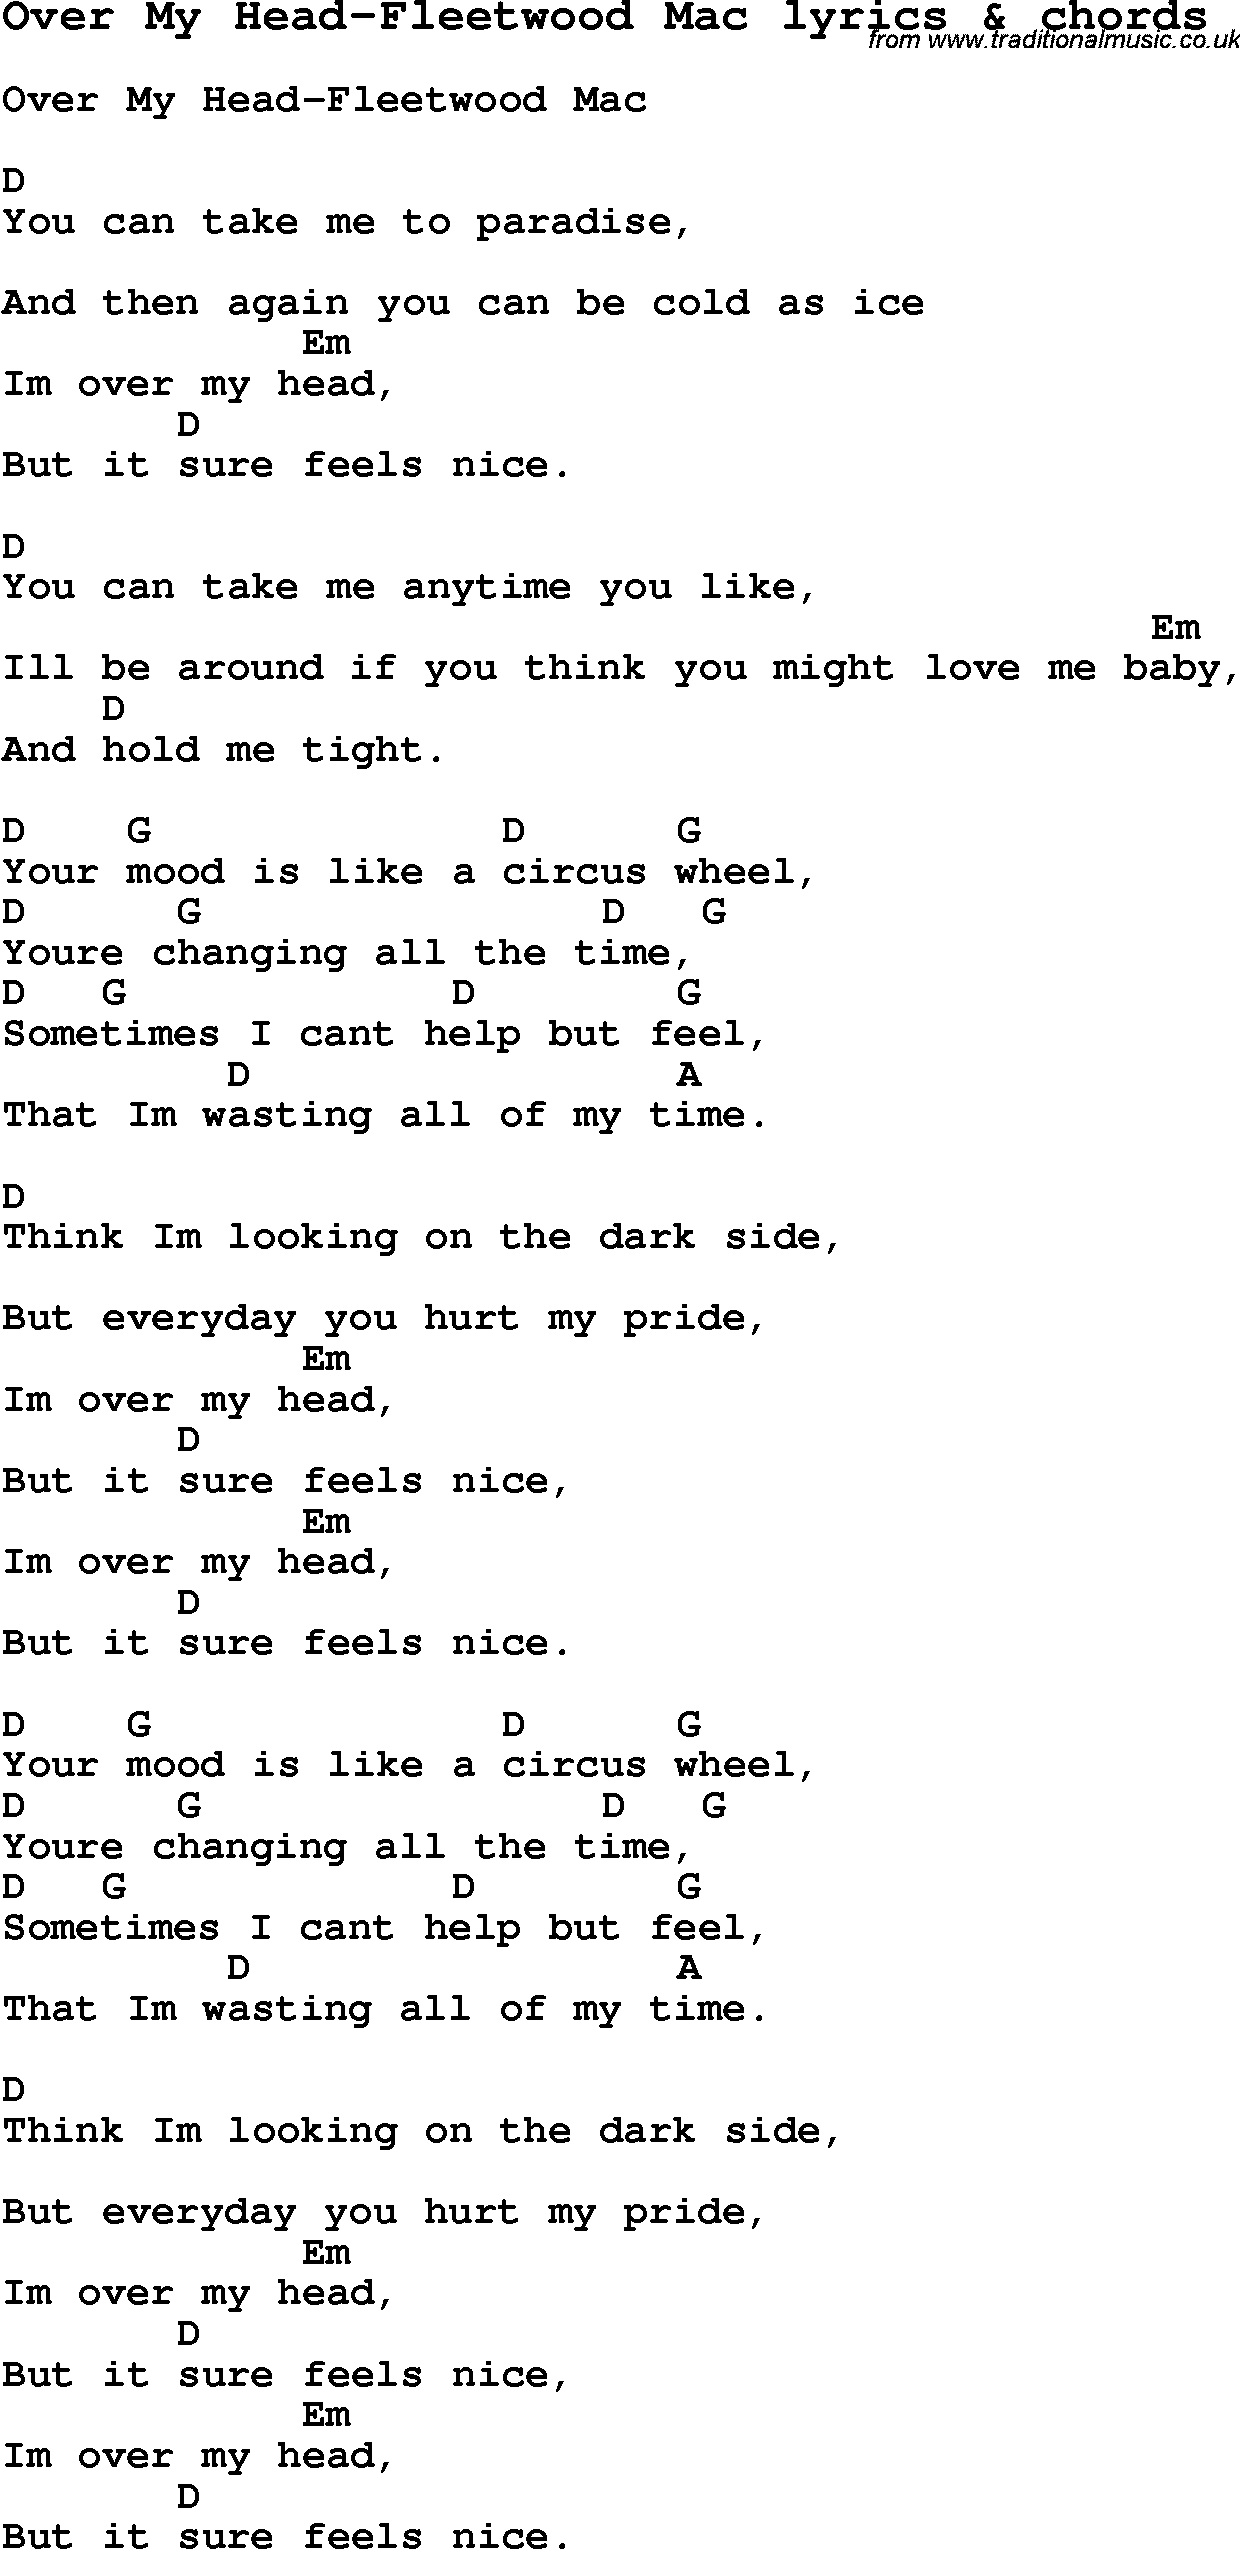 Love Song Lyrics for: Over My Head-Fleetwood Mac with chords for Ukulele, Guitar Banjo etc.